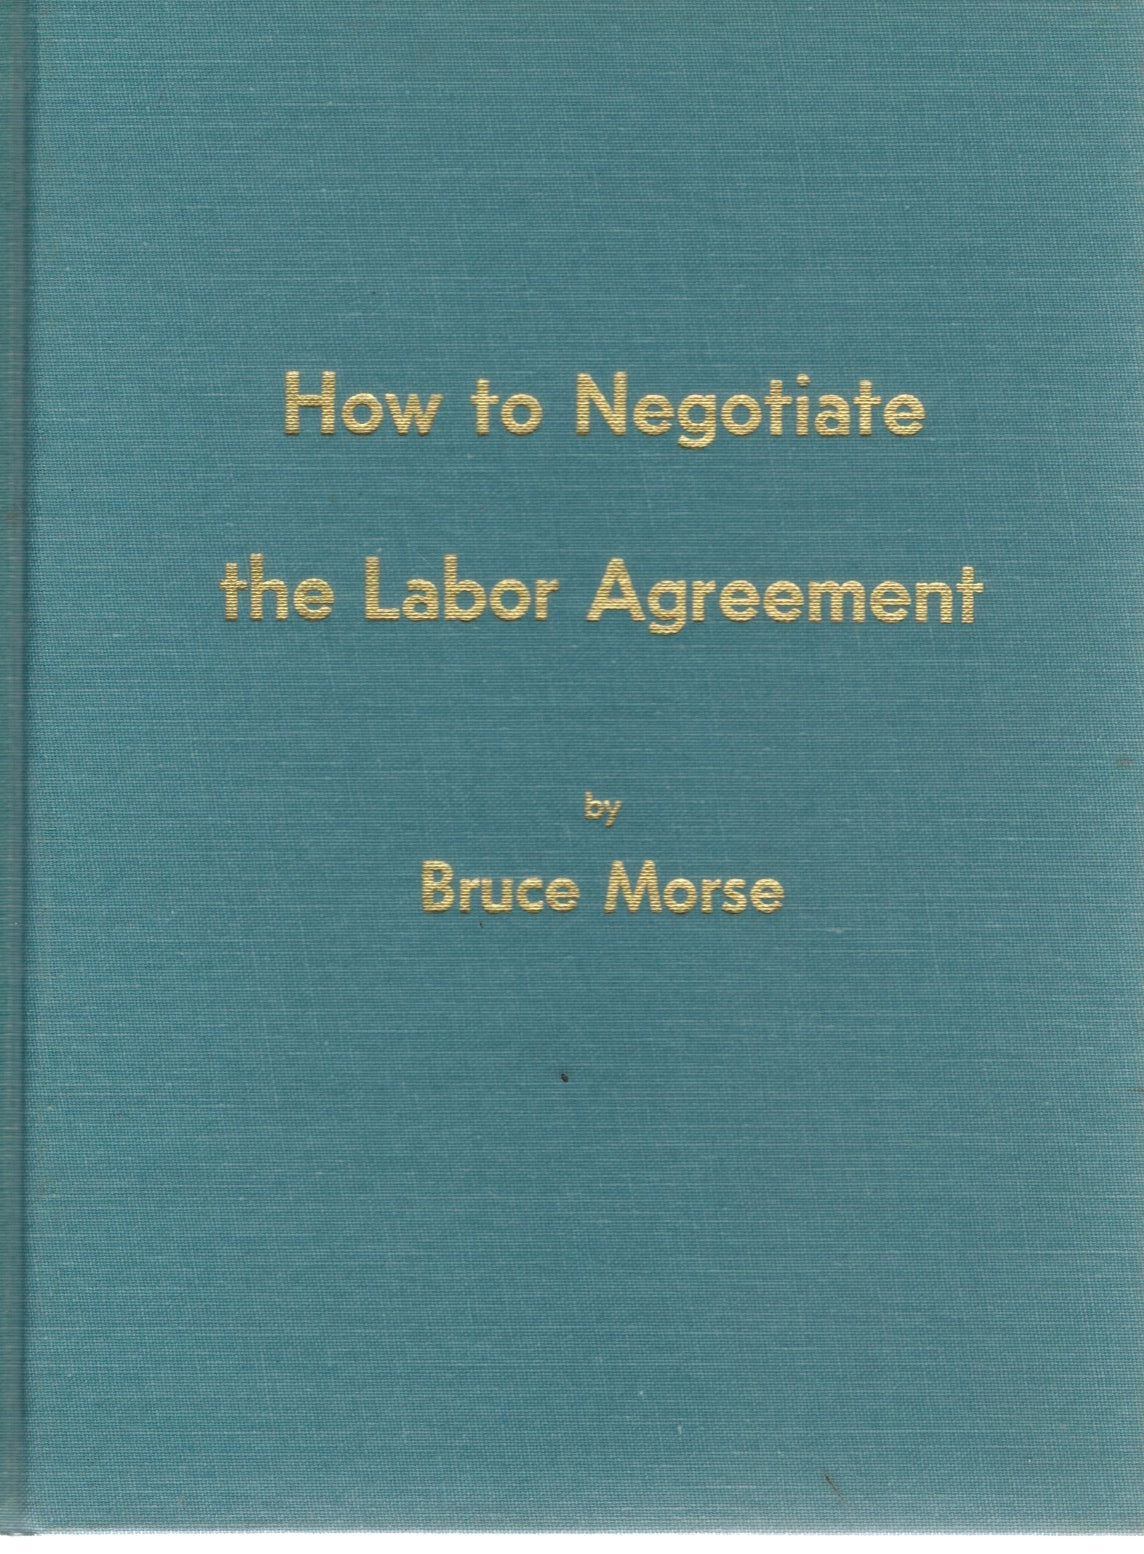 HOW TO NEGOTIATE THE LABOR AGREEMENT